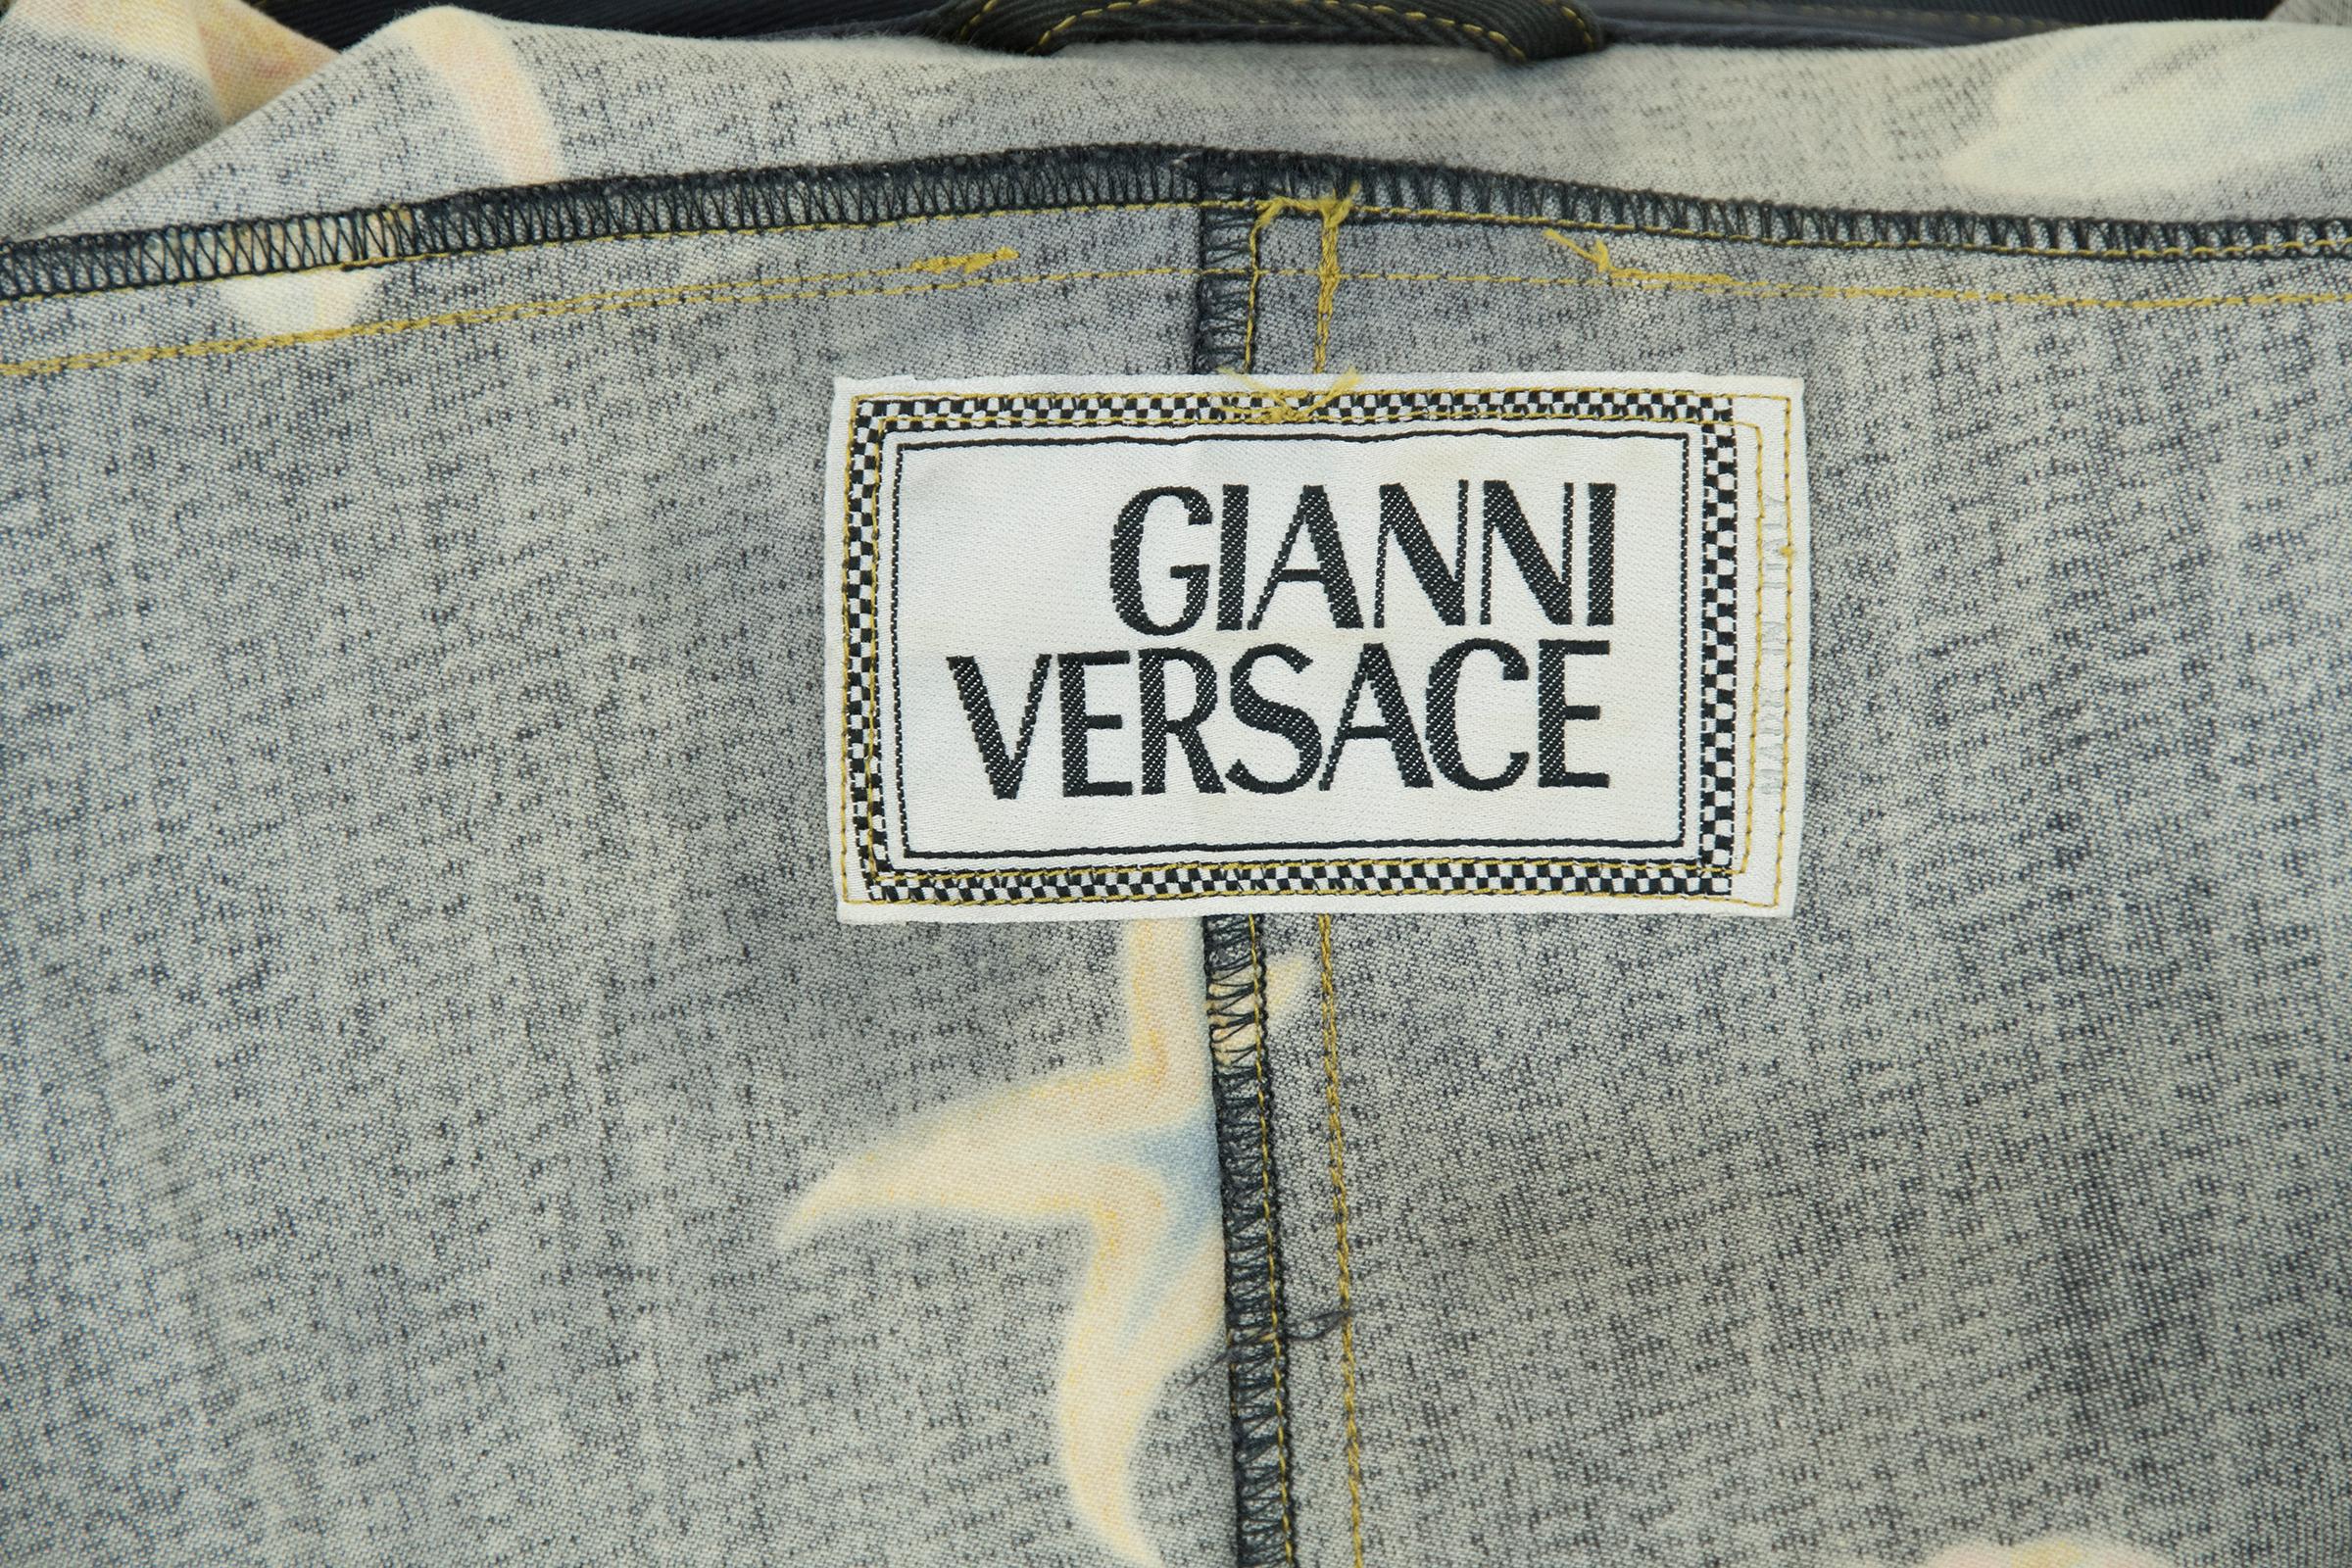 Vintage Gianni Versace Starfish Jacket - Size XS/S For Sale 2